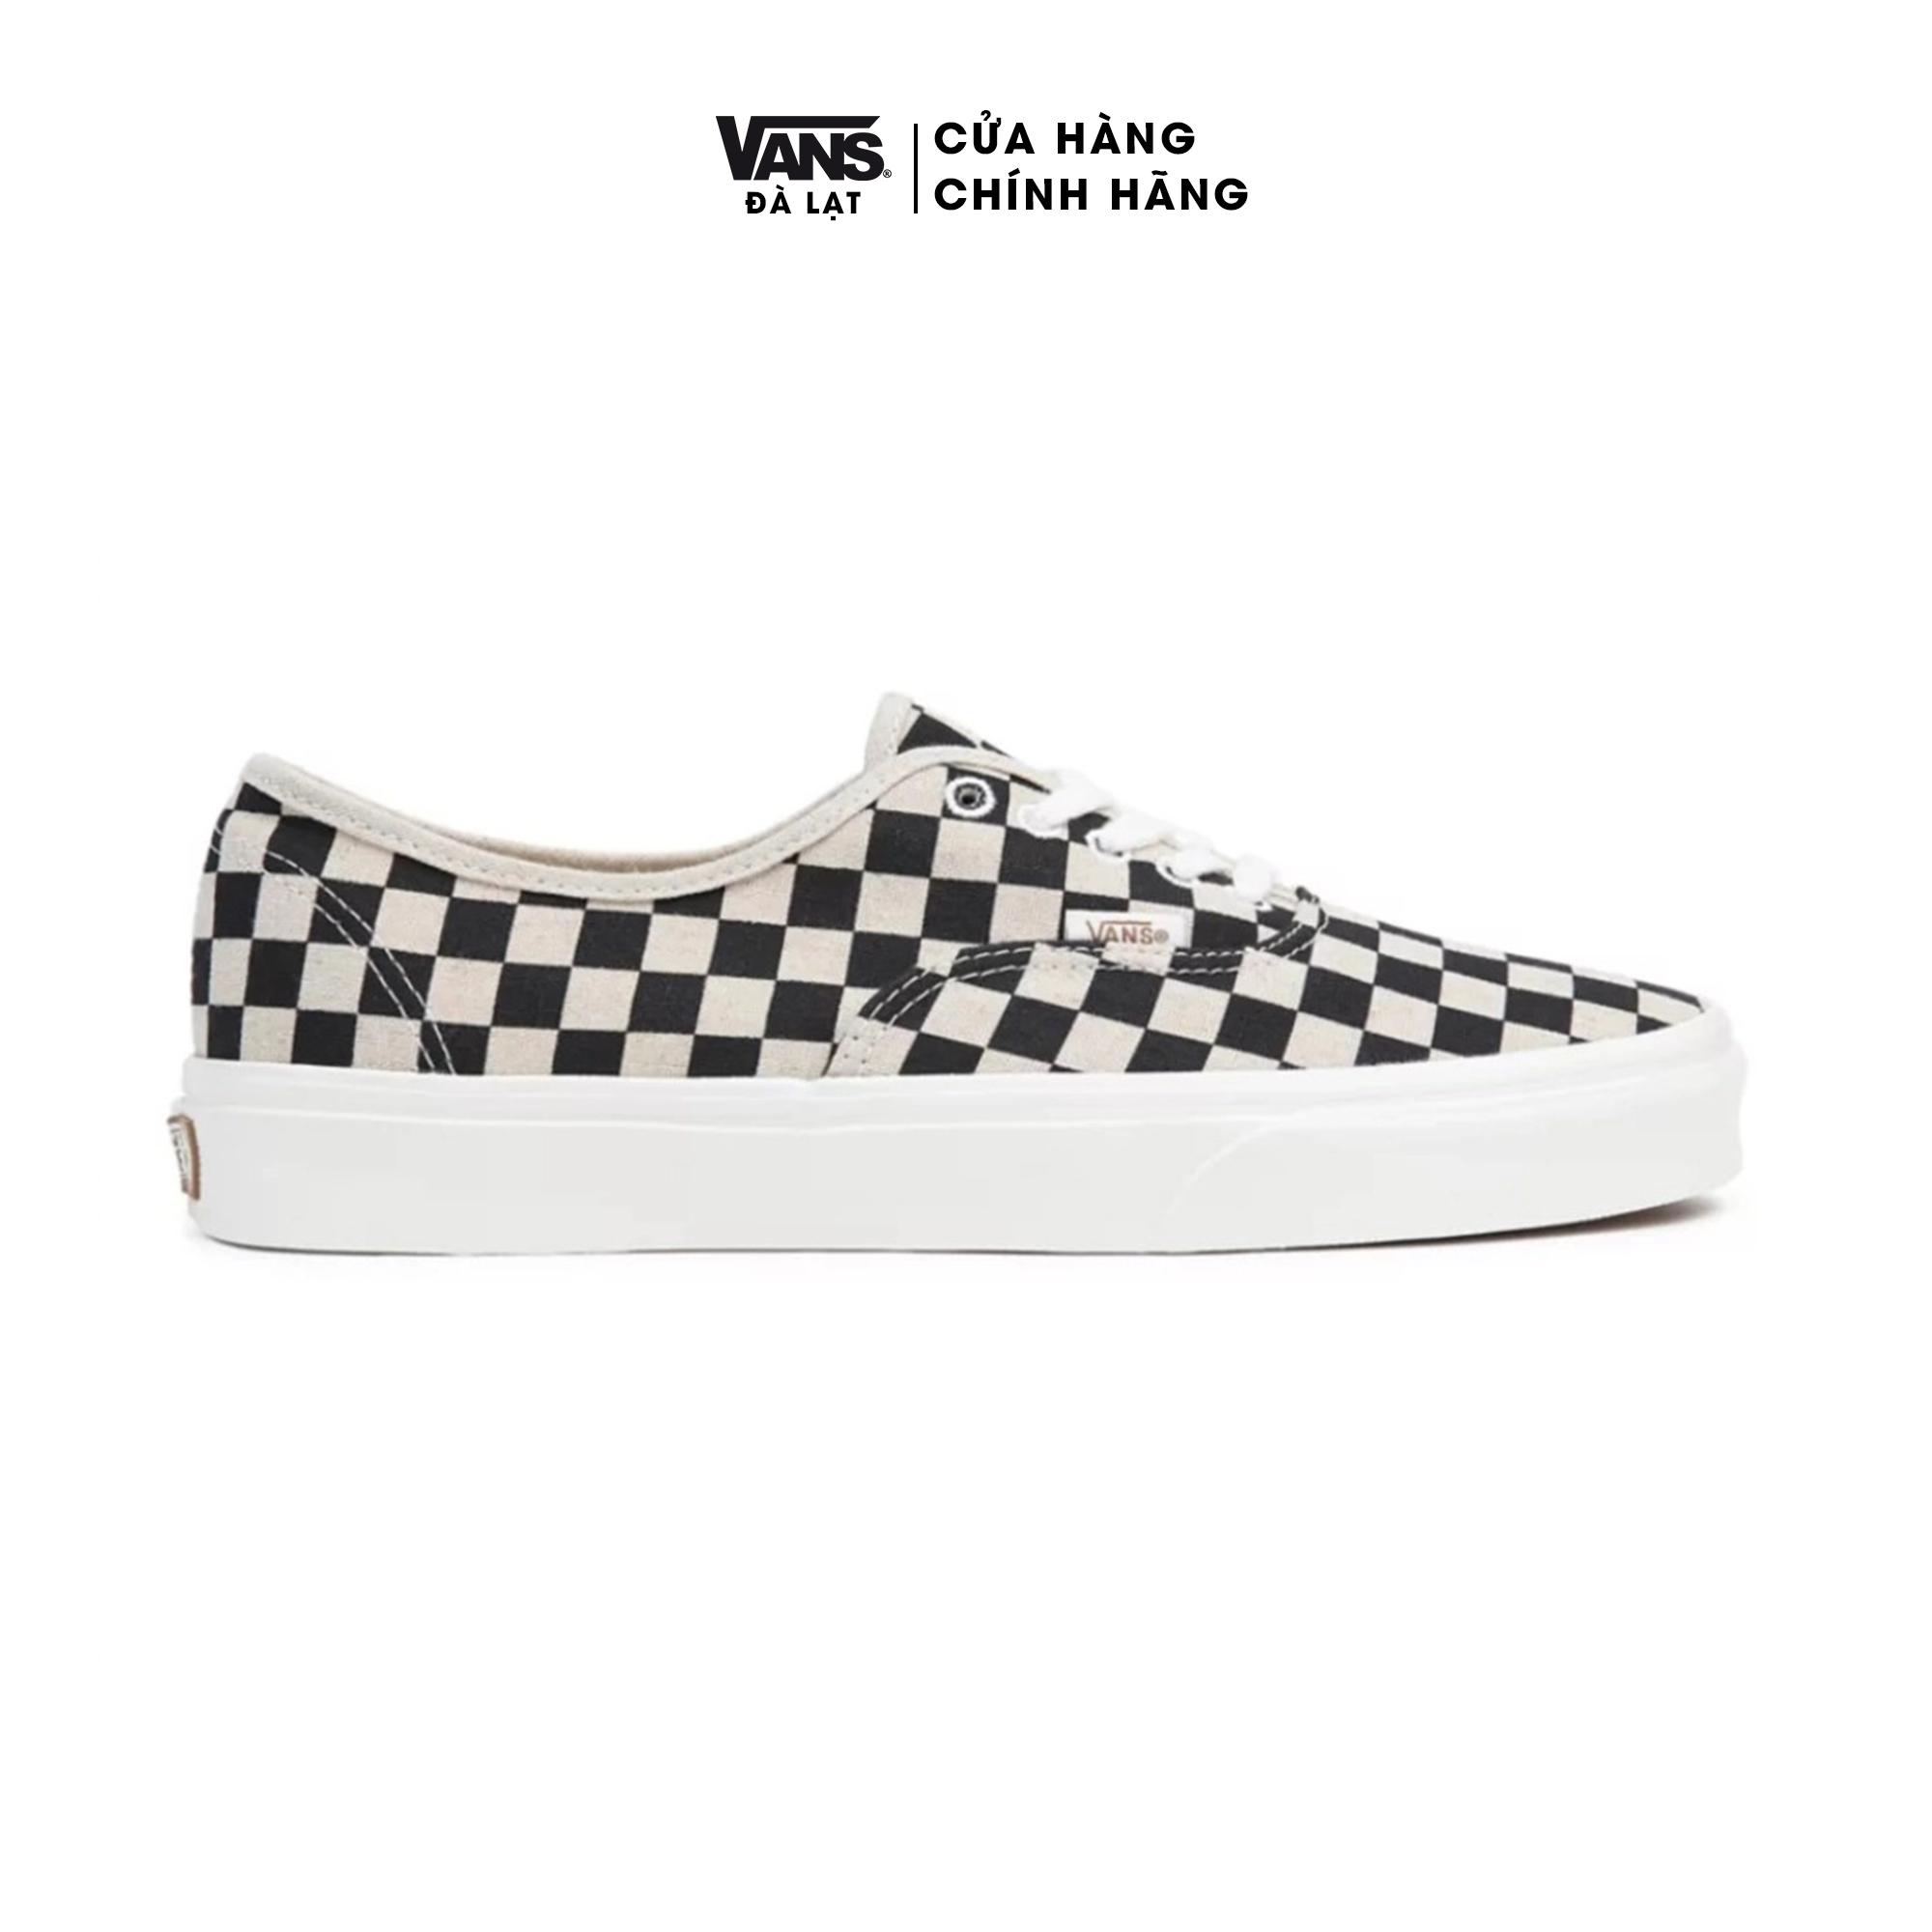 Giày Vans caro Sneaker Authentic Eco Theory Checkerboard - VN0A5KRD705